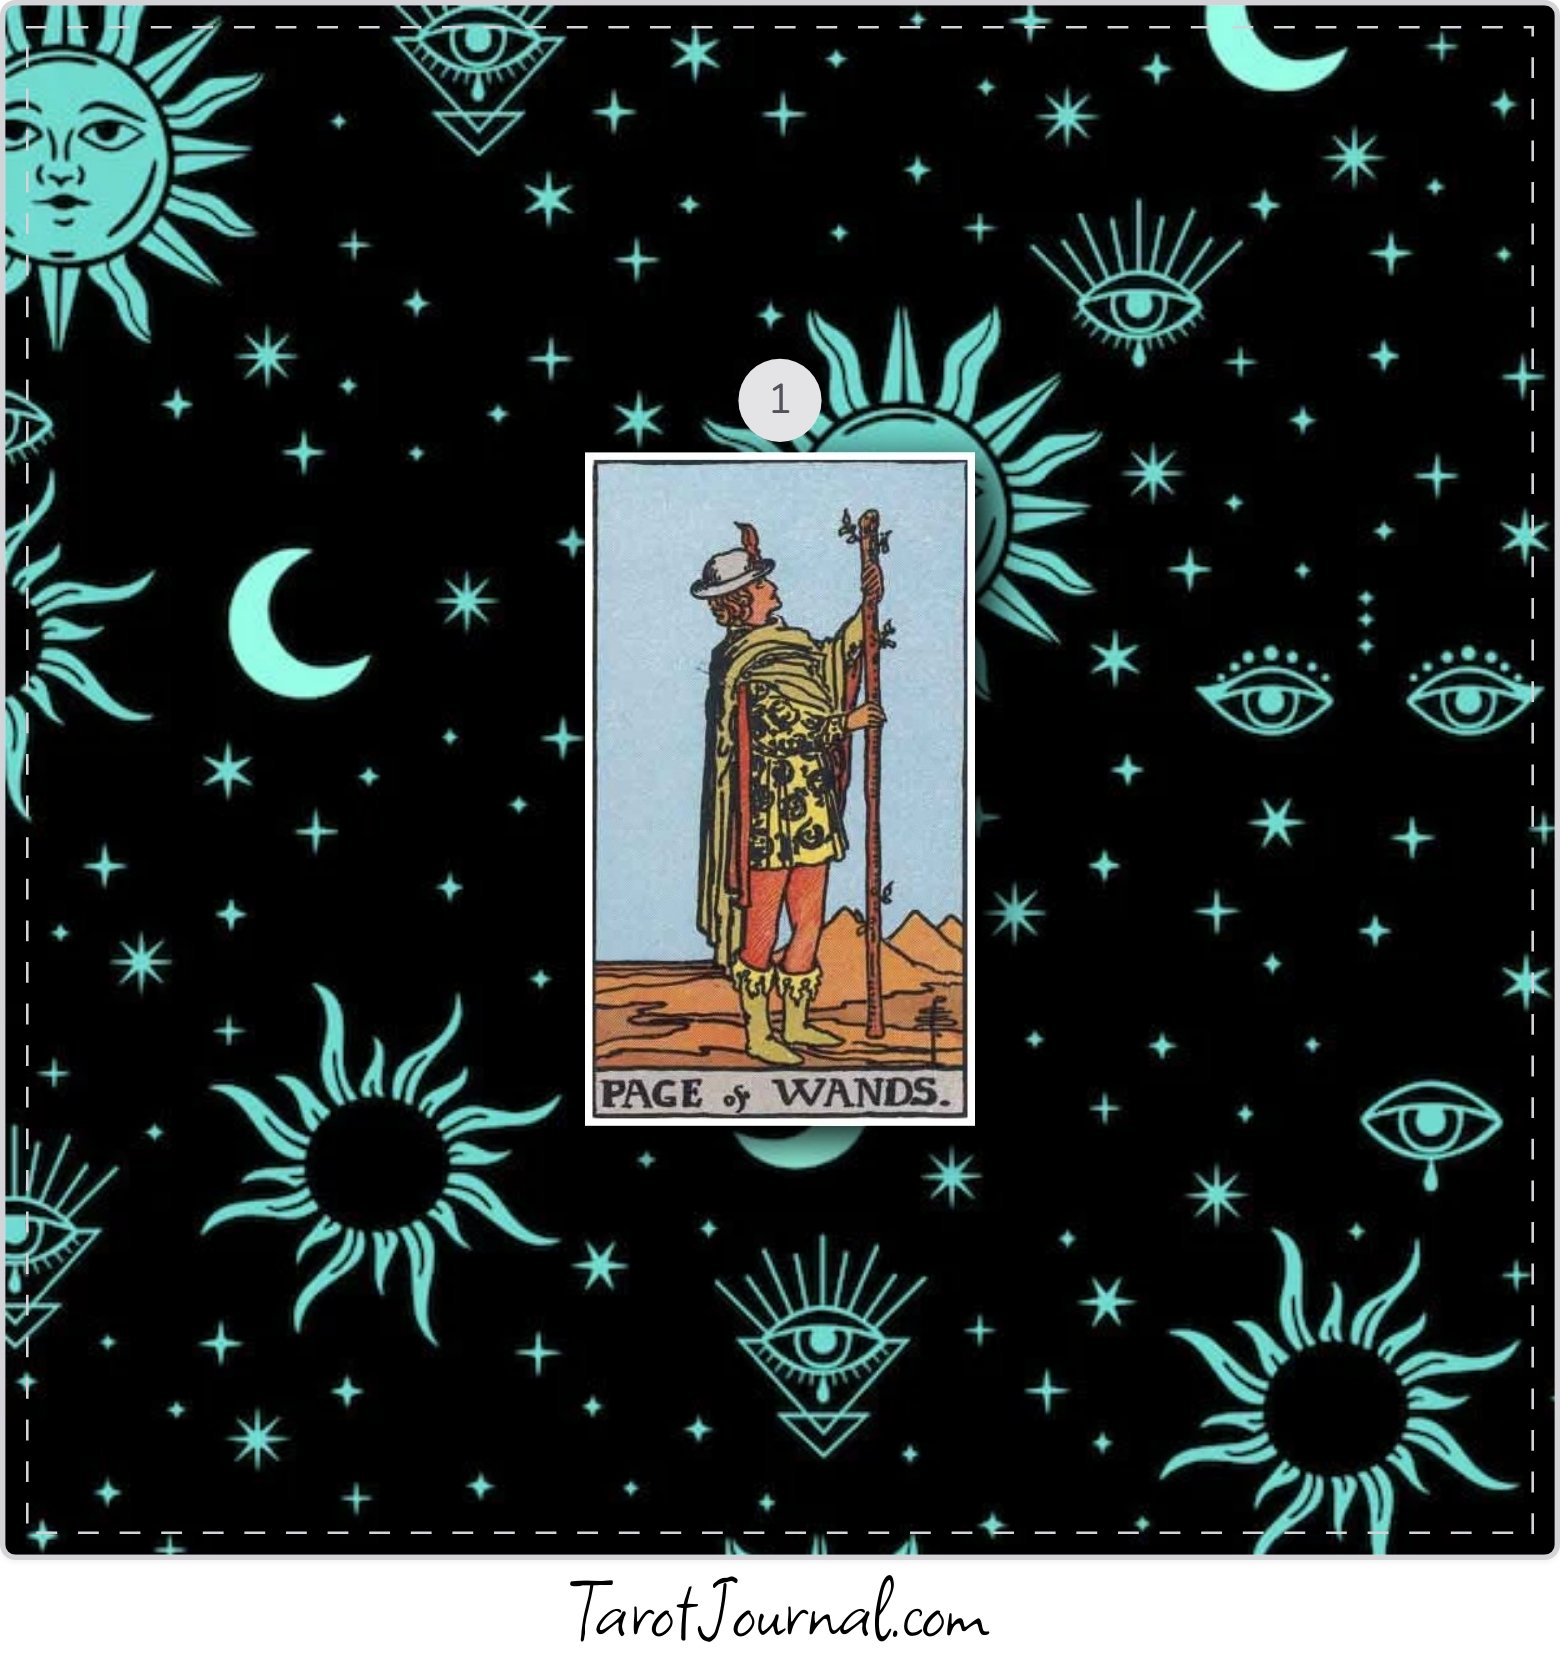 Card of the day - tarot reading by Ici La Lune